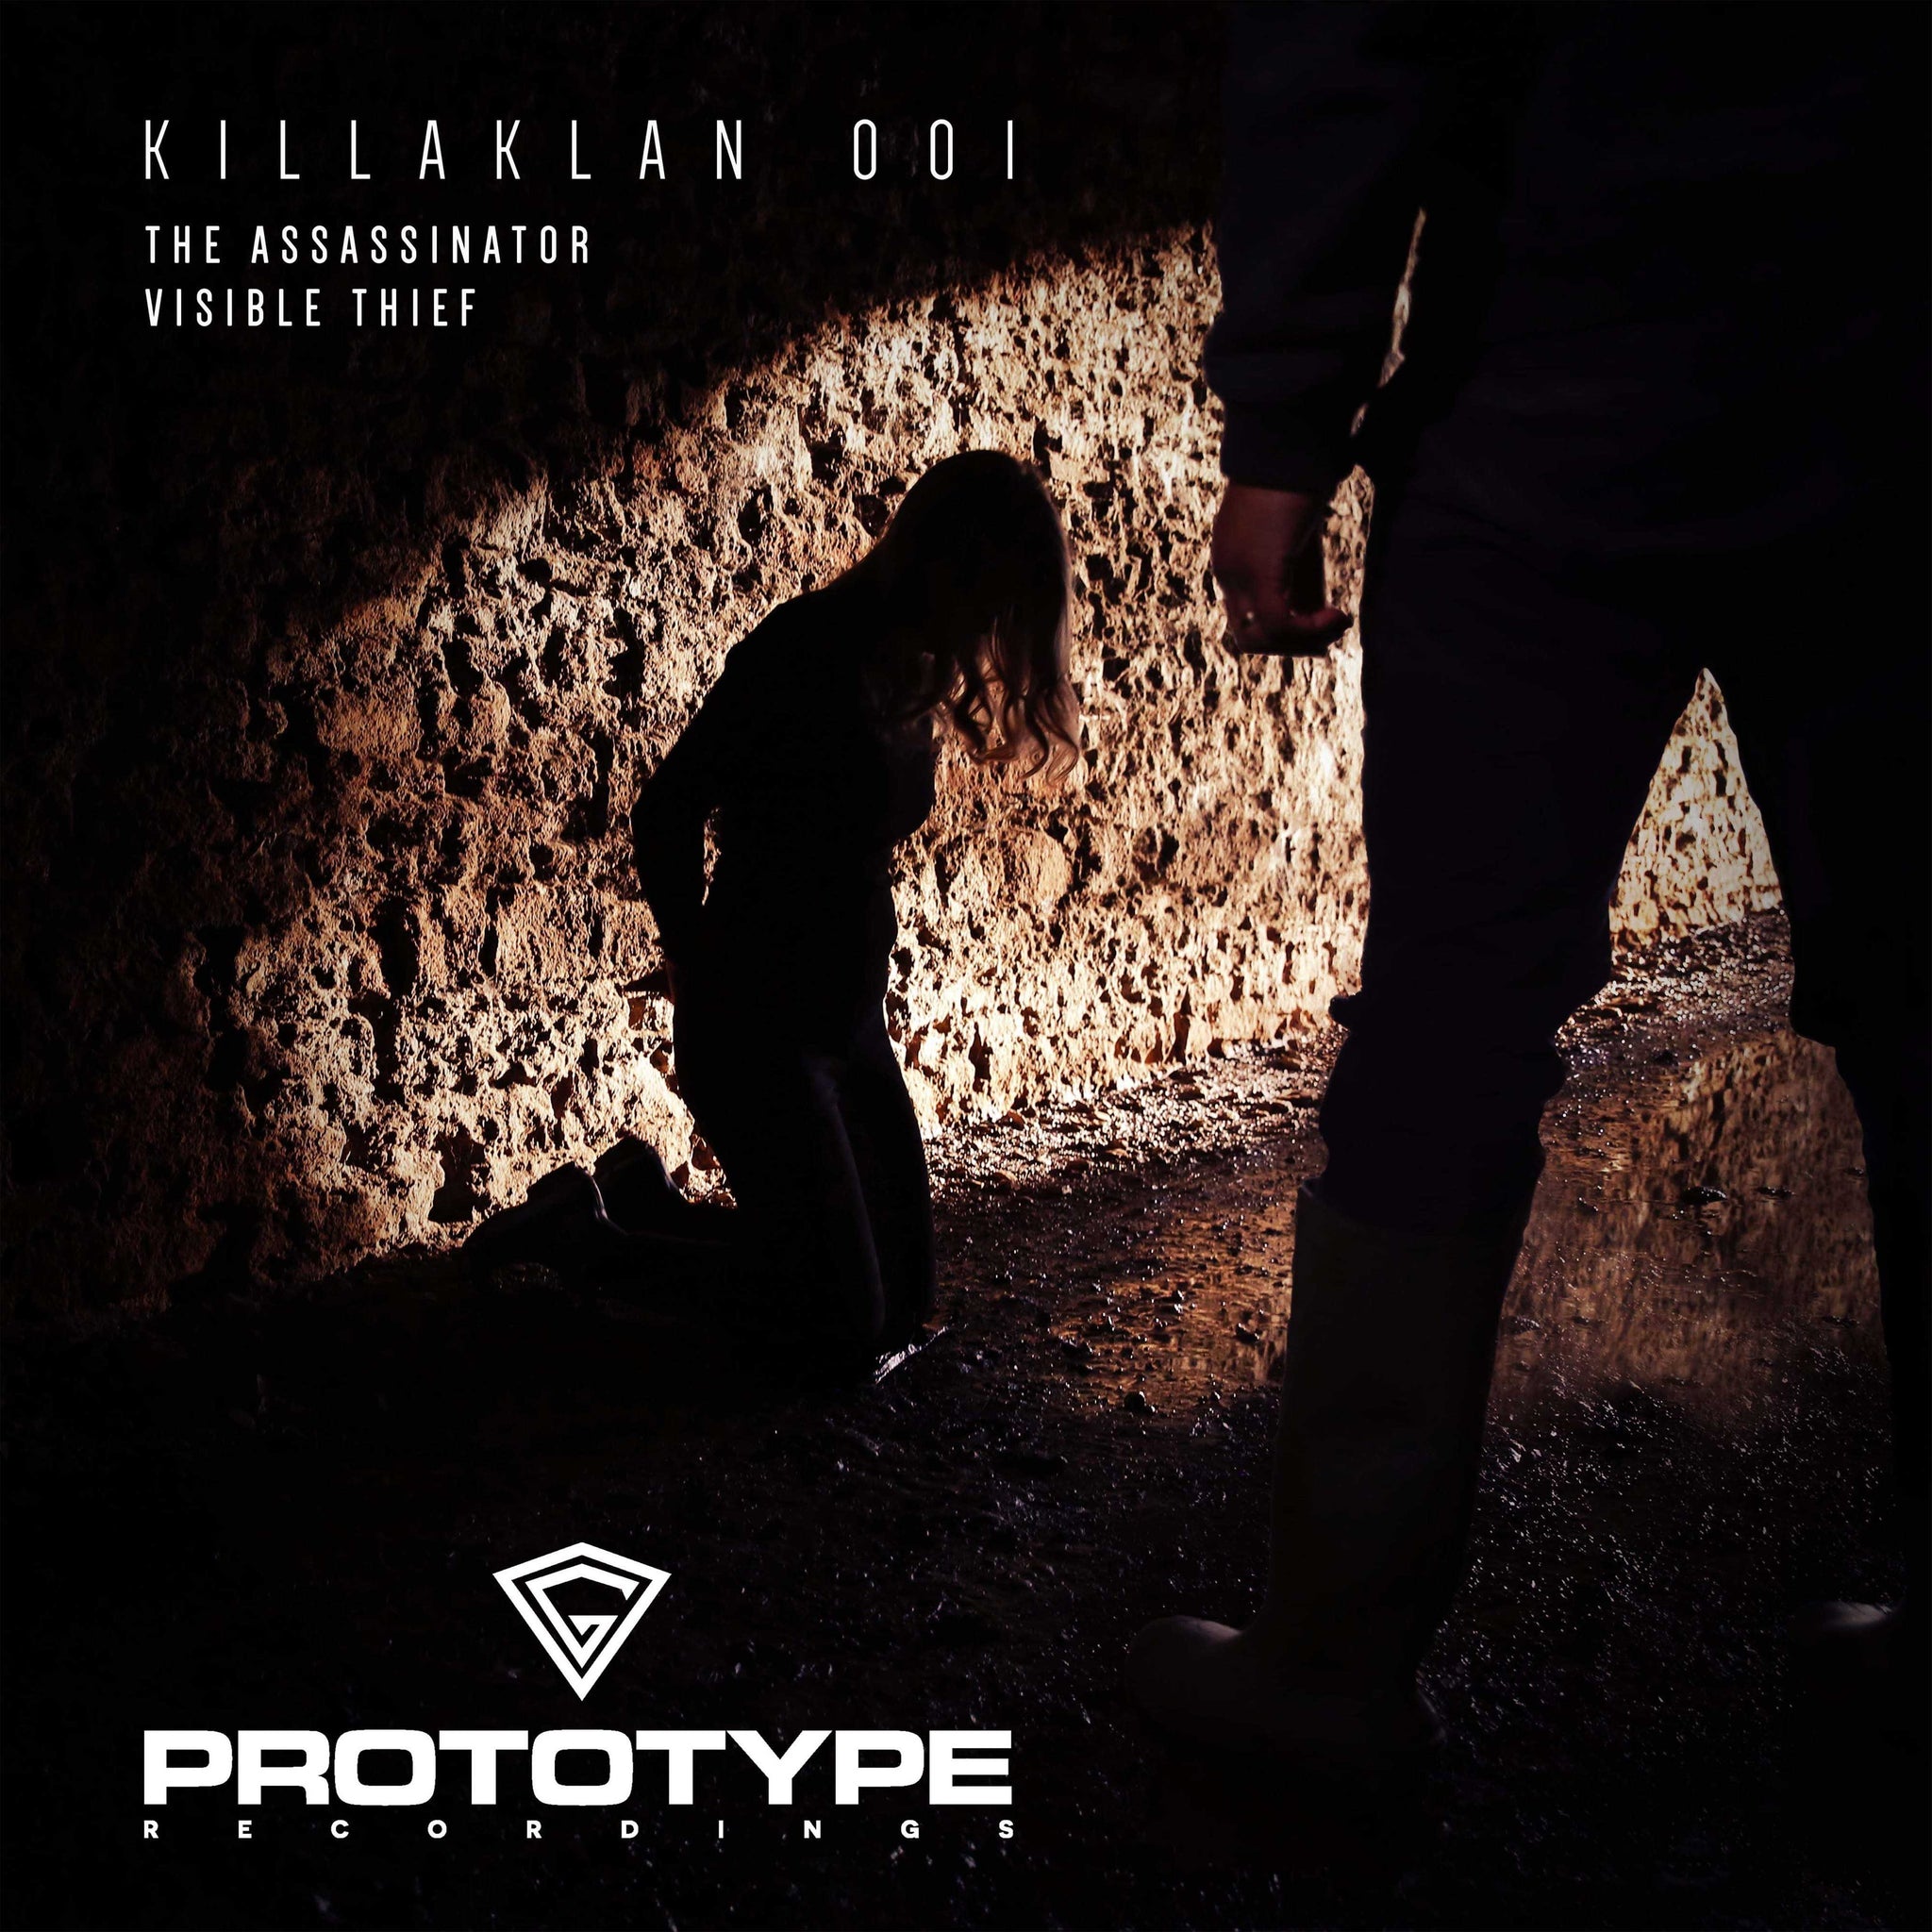 KillaKlan001 - The Assassinator - Out Of Joint Records